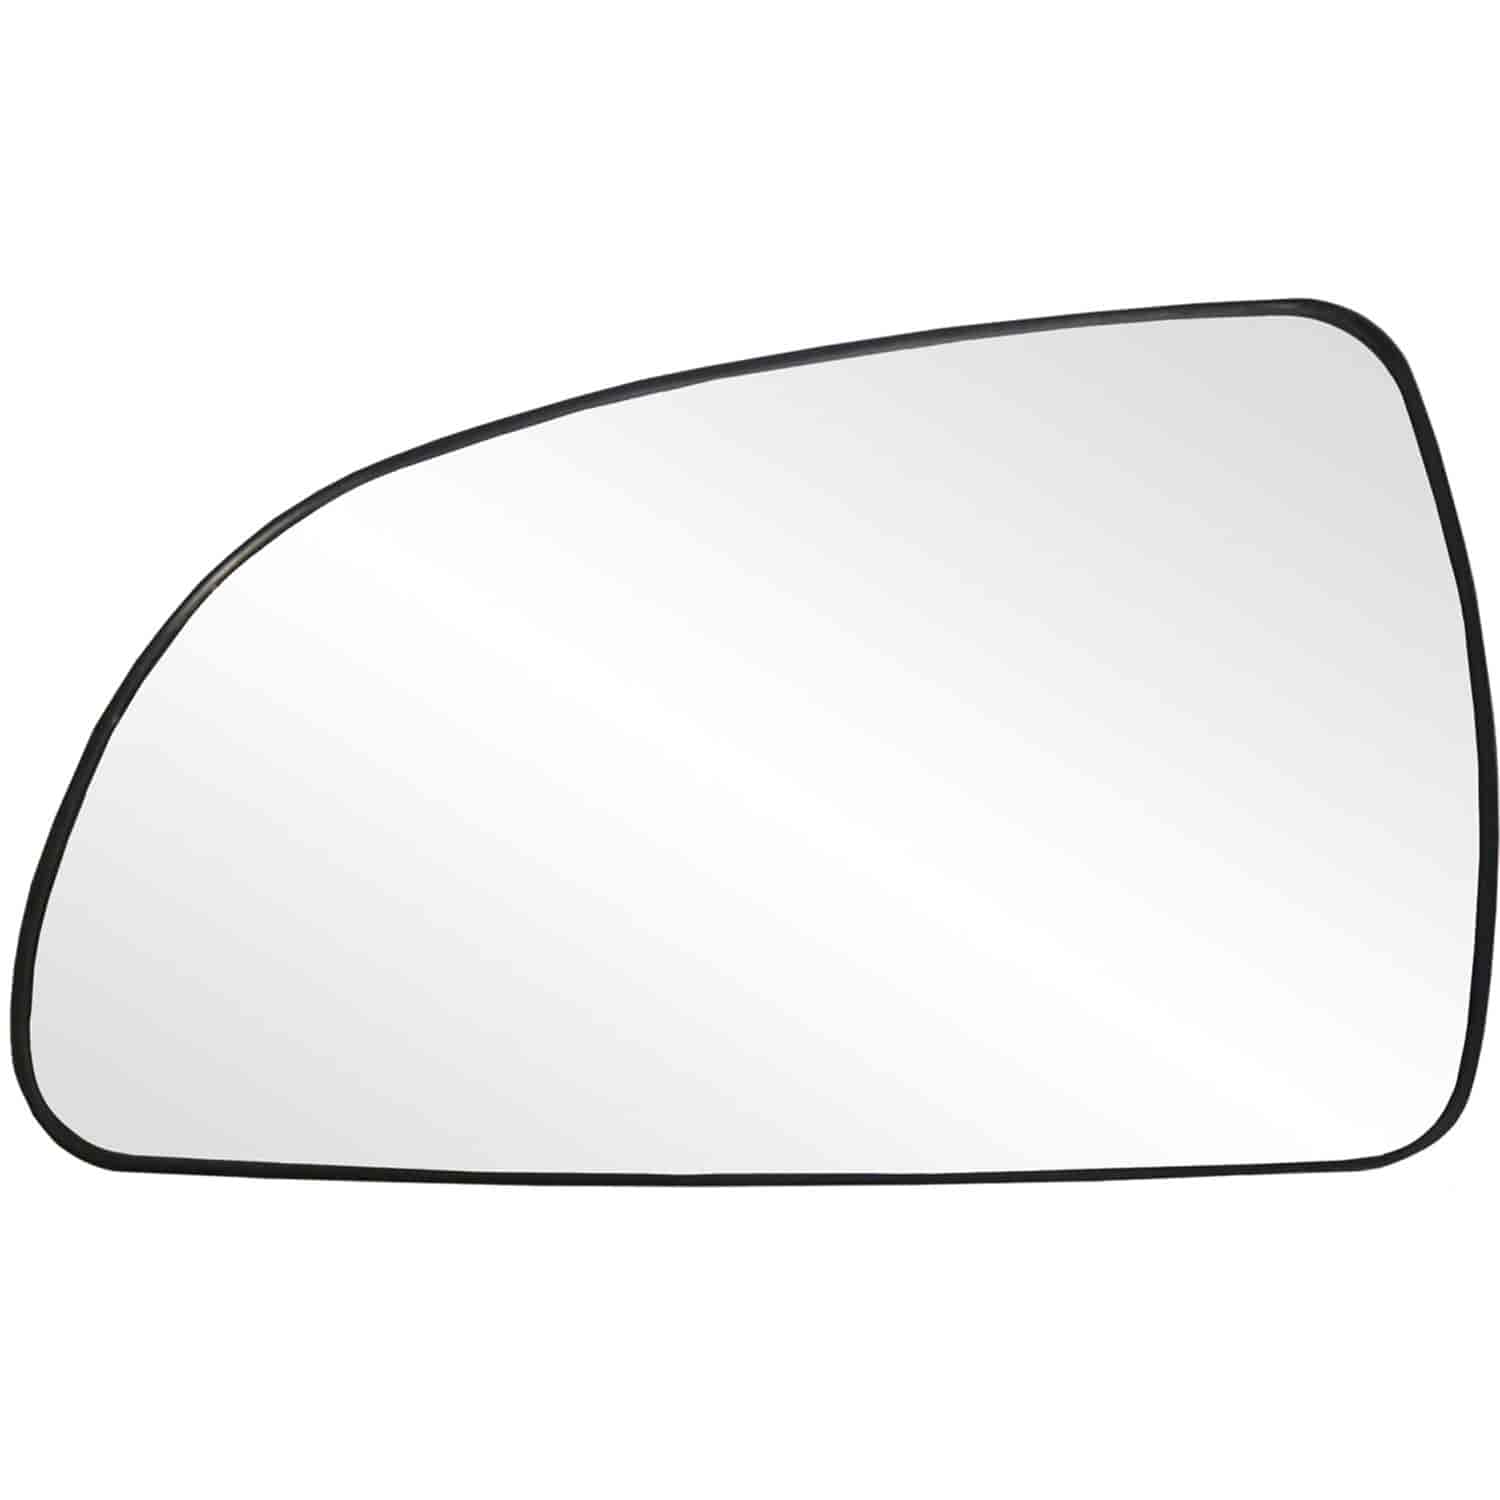 Heated Replacement Glass Assembly for 07-10 Sonata replace your cracked or broken driver side mirror